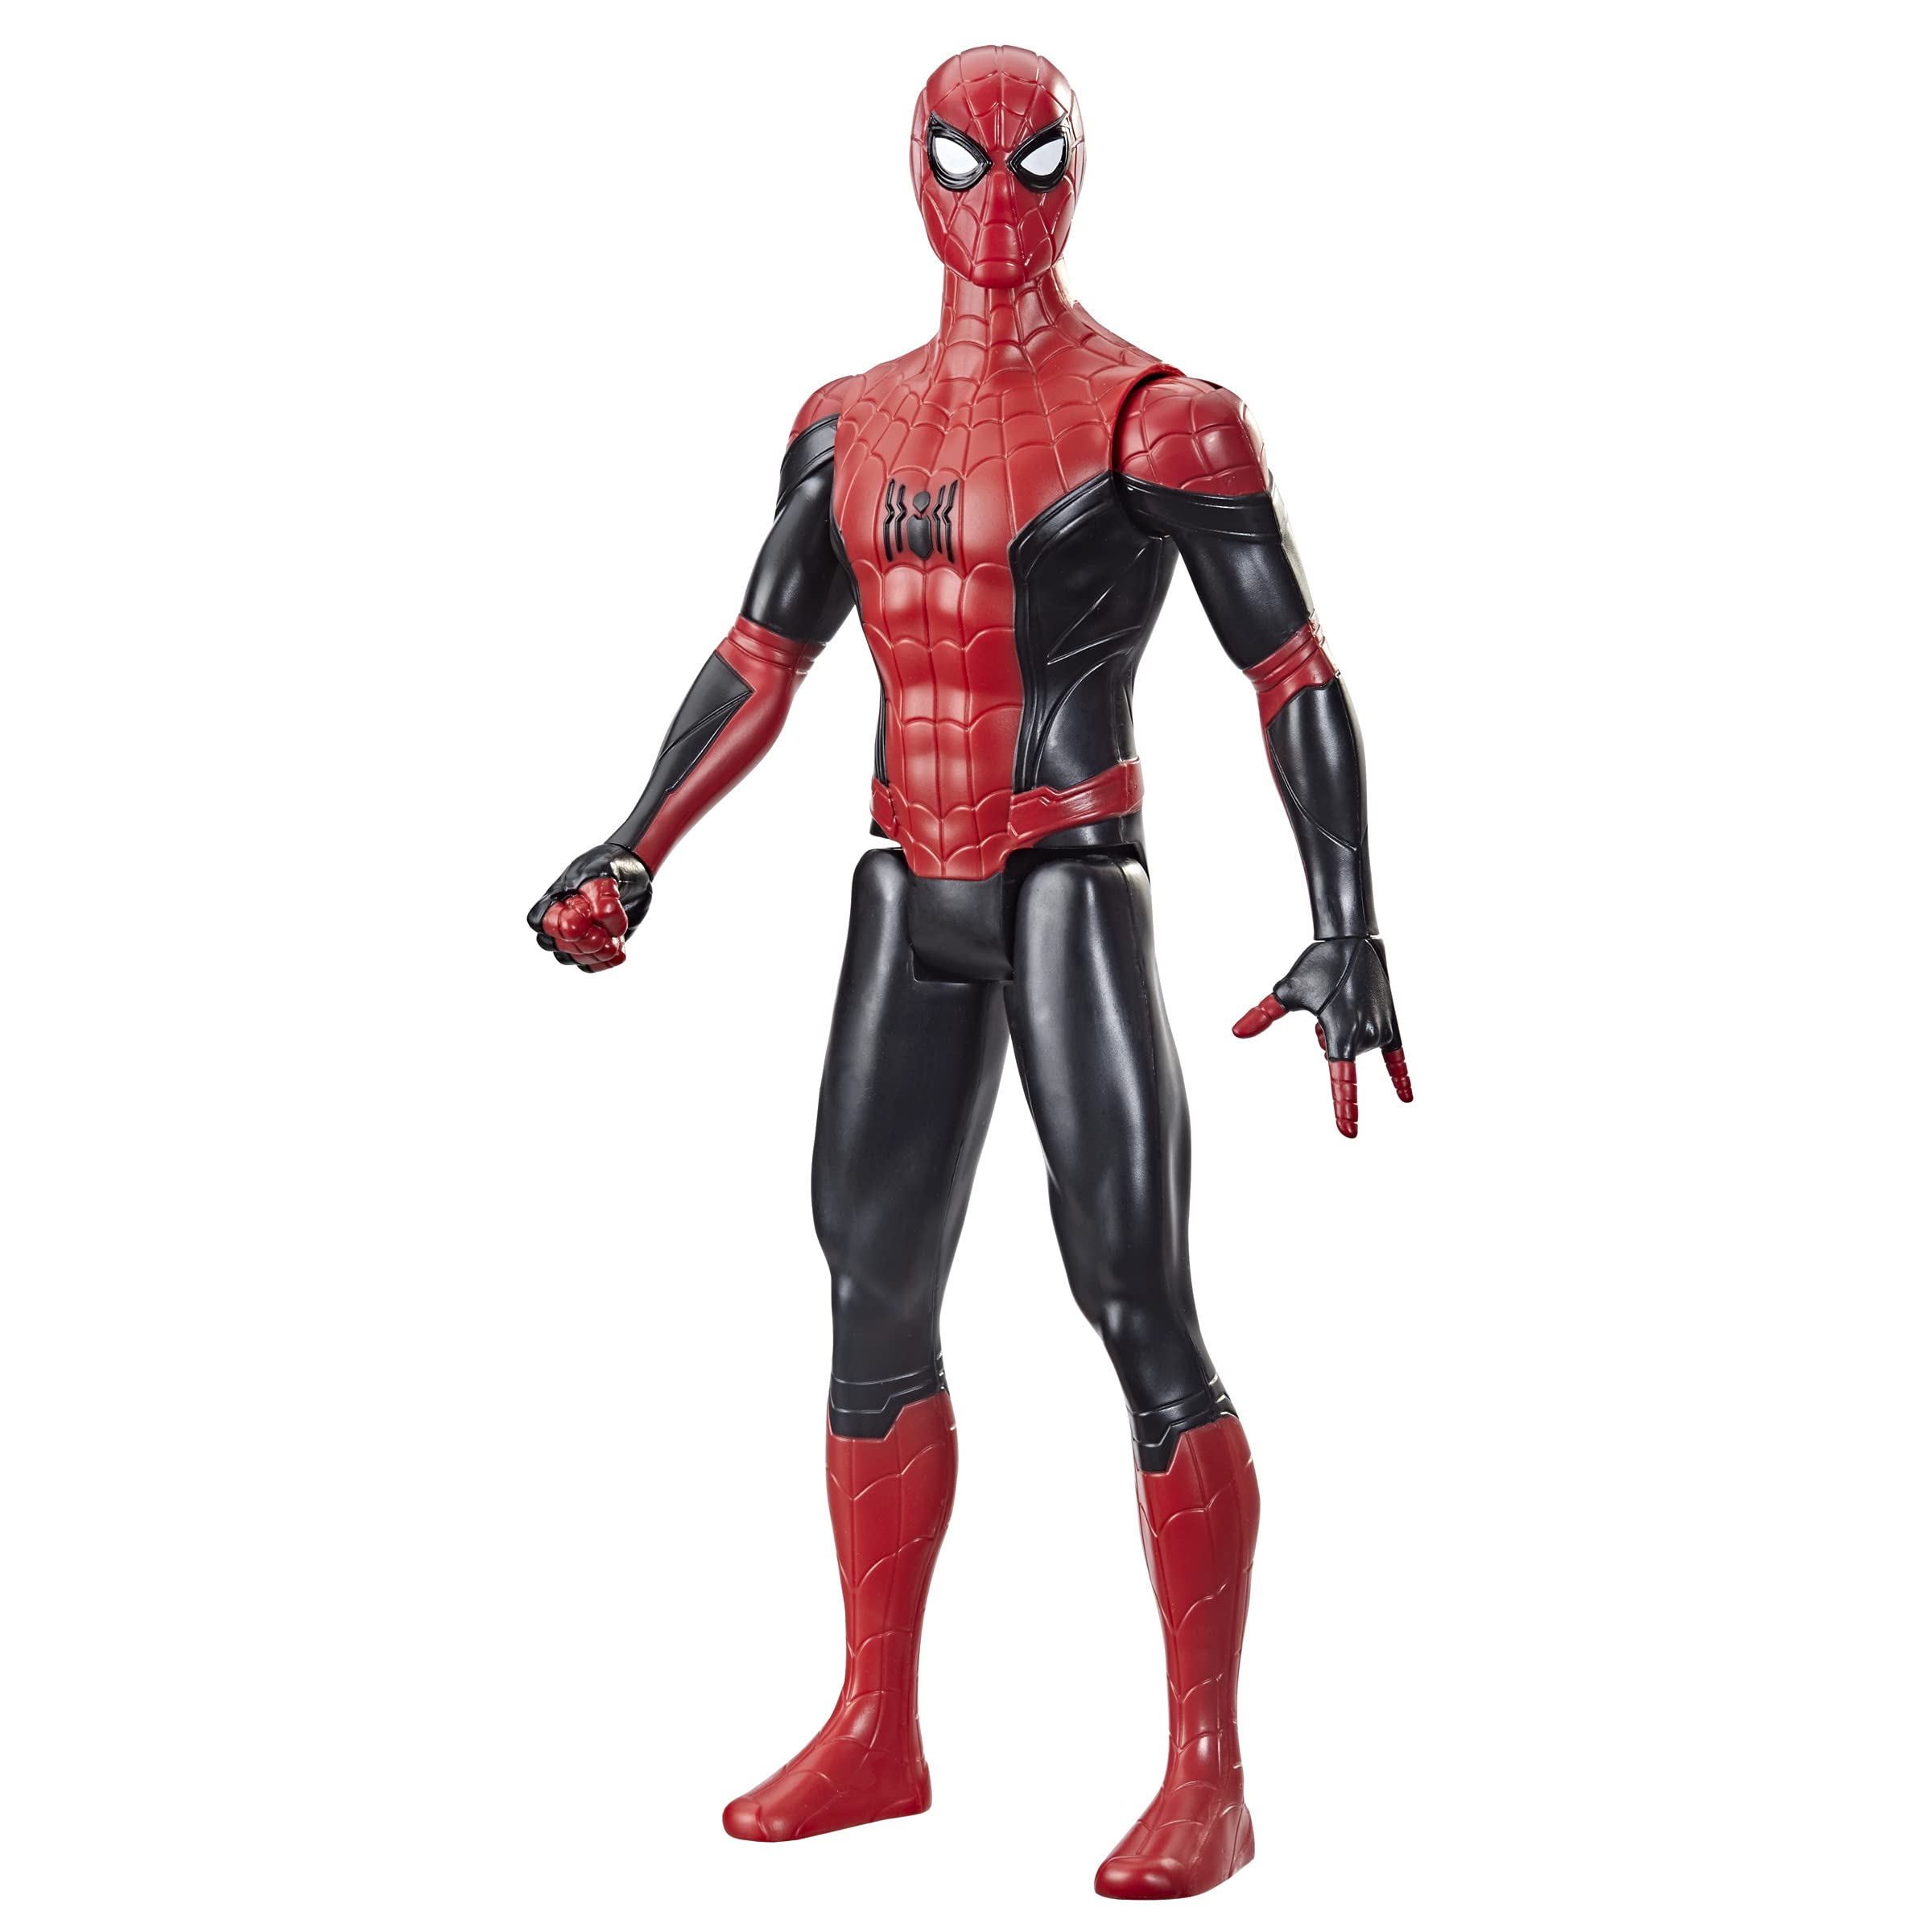 Mua Spider-Man Marvel Titan Hero Series 12-Inch New Red and Black Suit  Action Figure Toy, Movie Inspired, for Kids Ages 4 and Up trên Amazon Mỹ  chính hãng 2023 | Giaonhan247